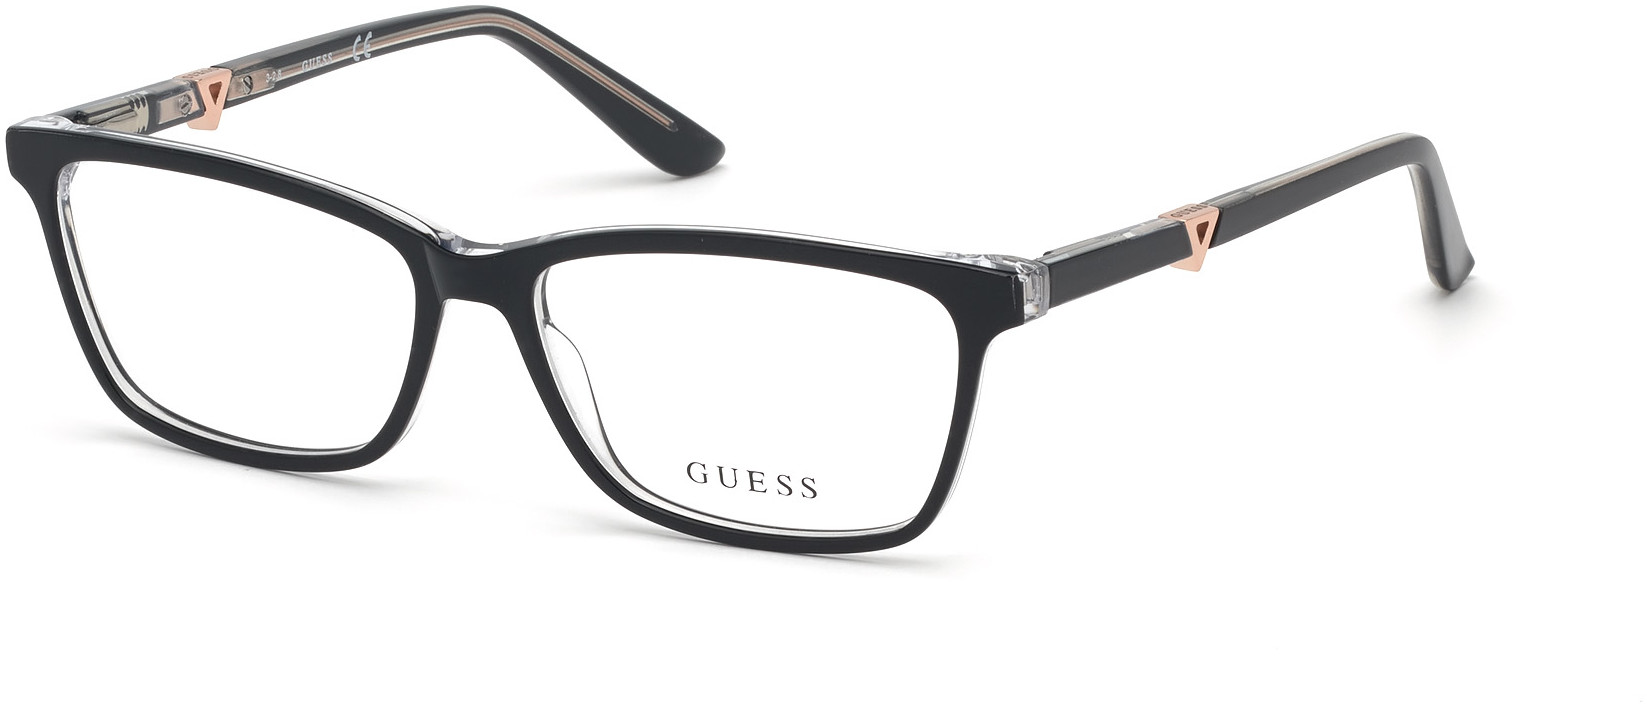 GUESS 2731